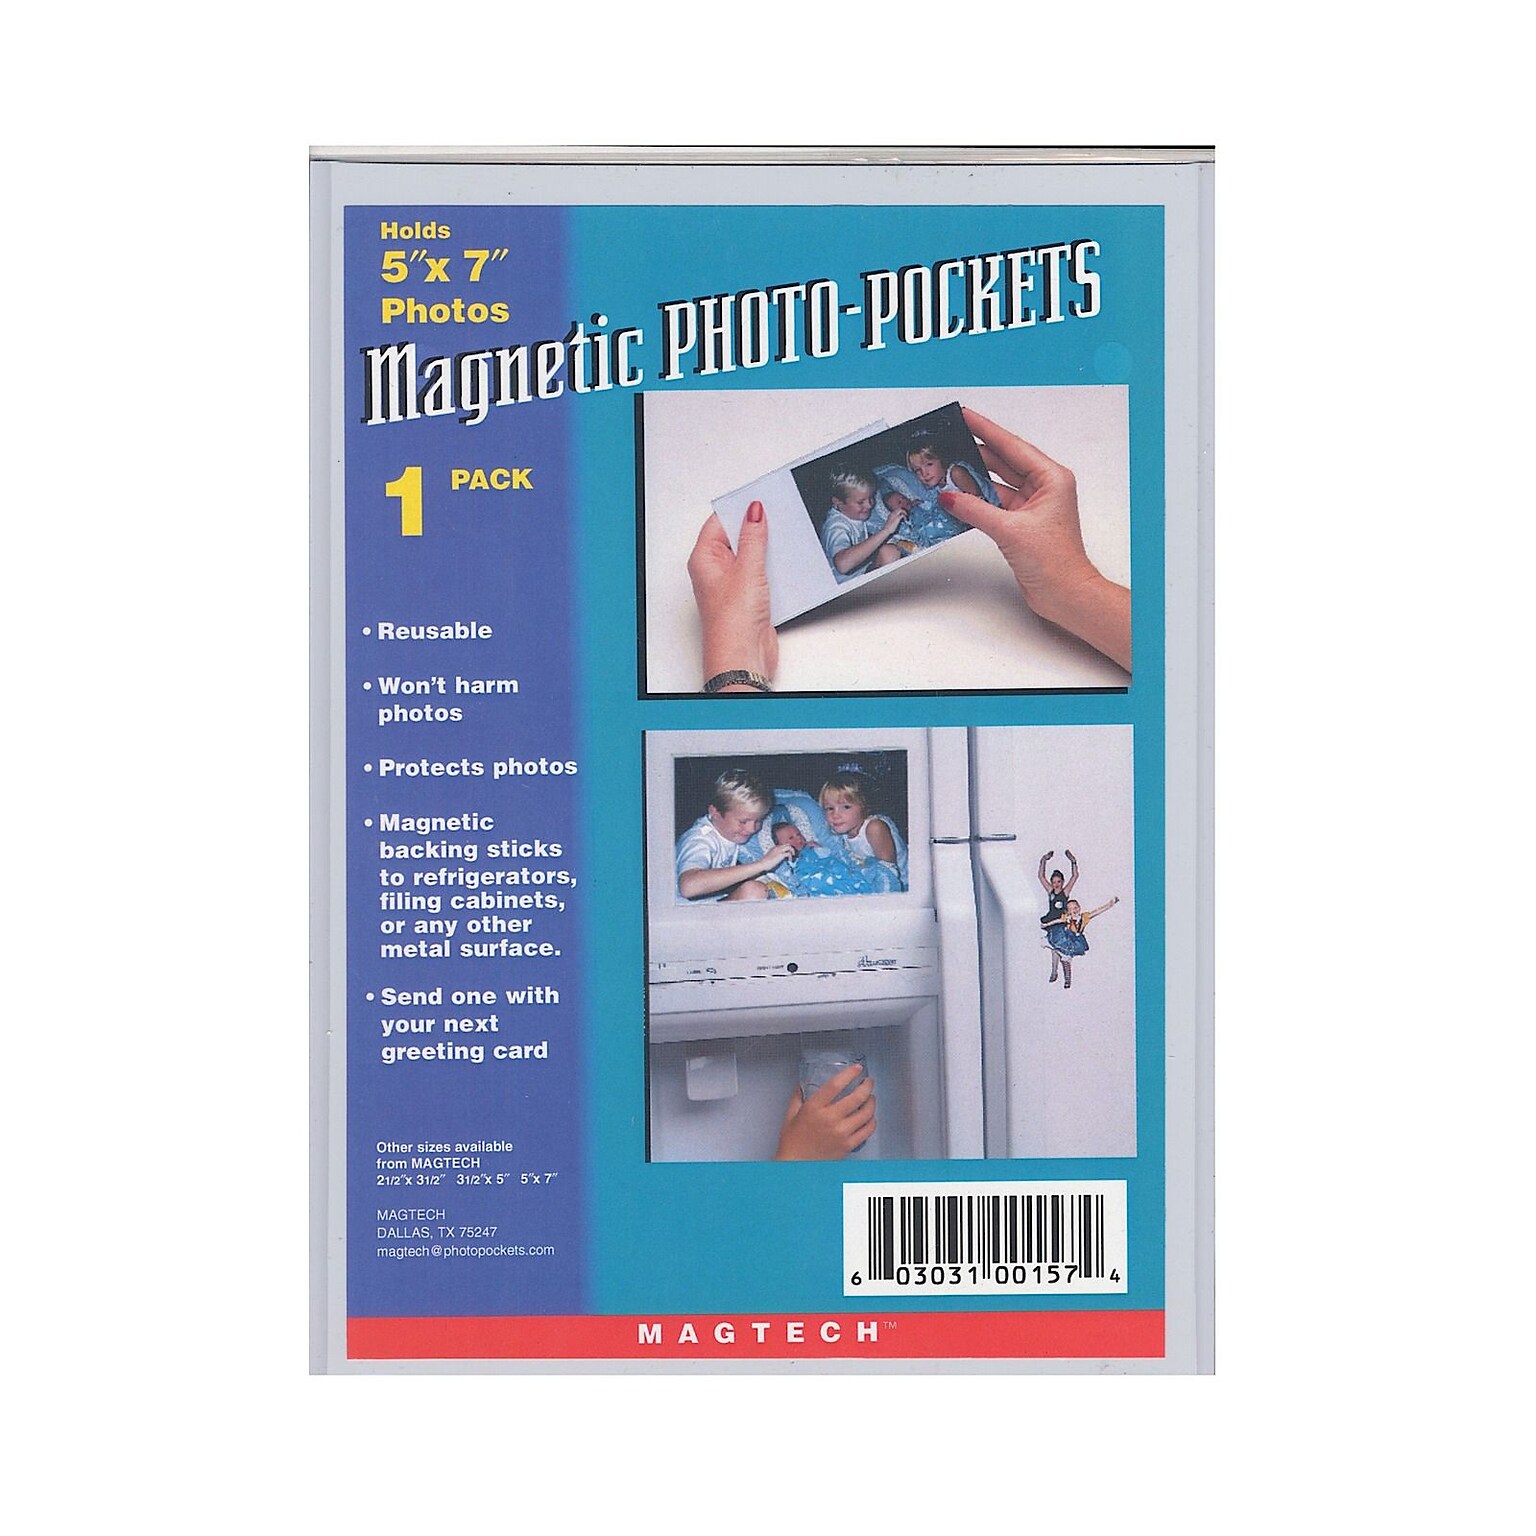 Magtech Magnetic Photo Pockets, 5 X 7, 12/Pack (38050-Pk12)